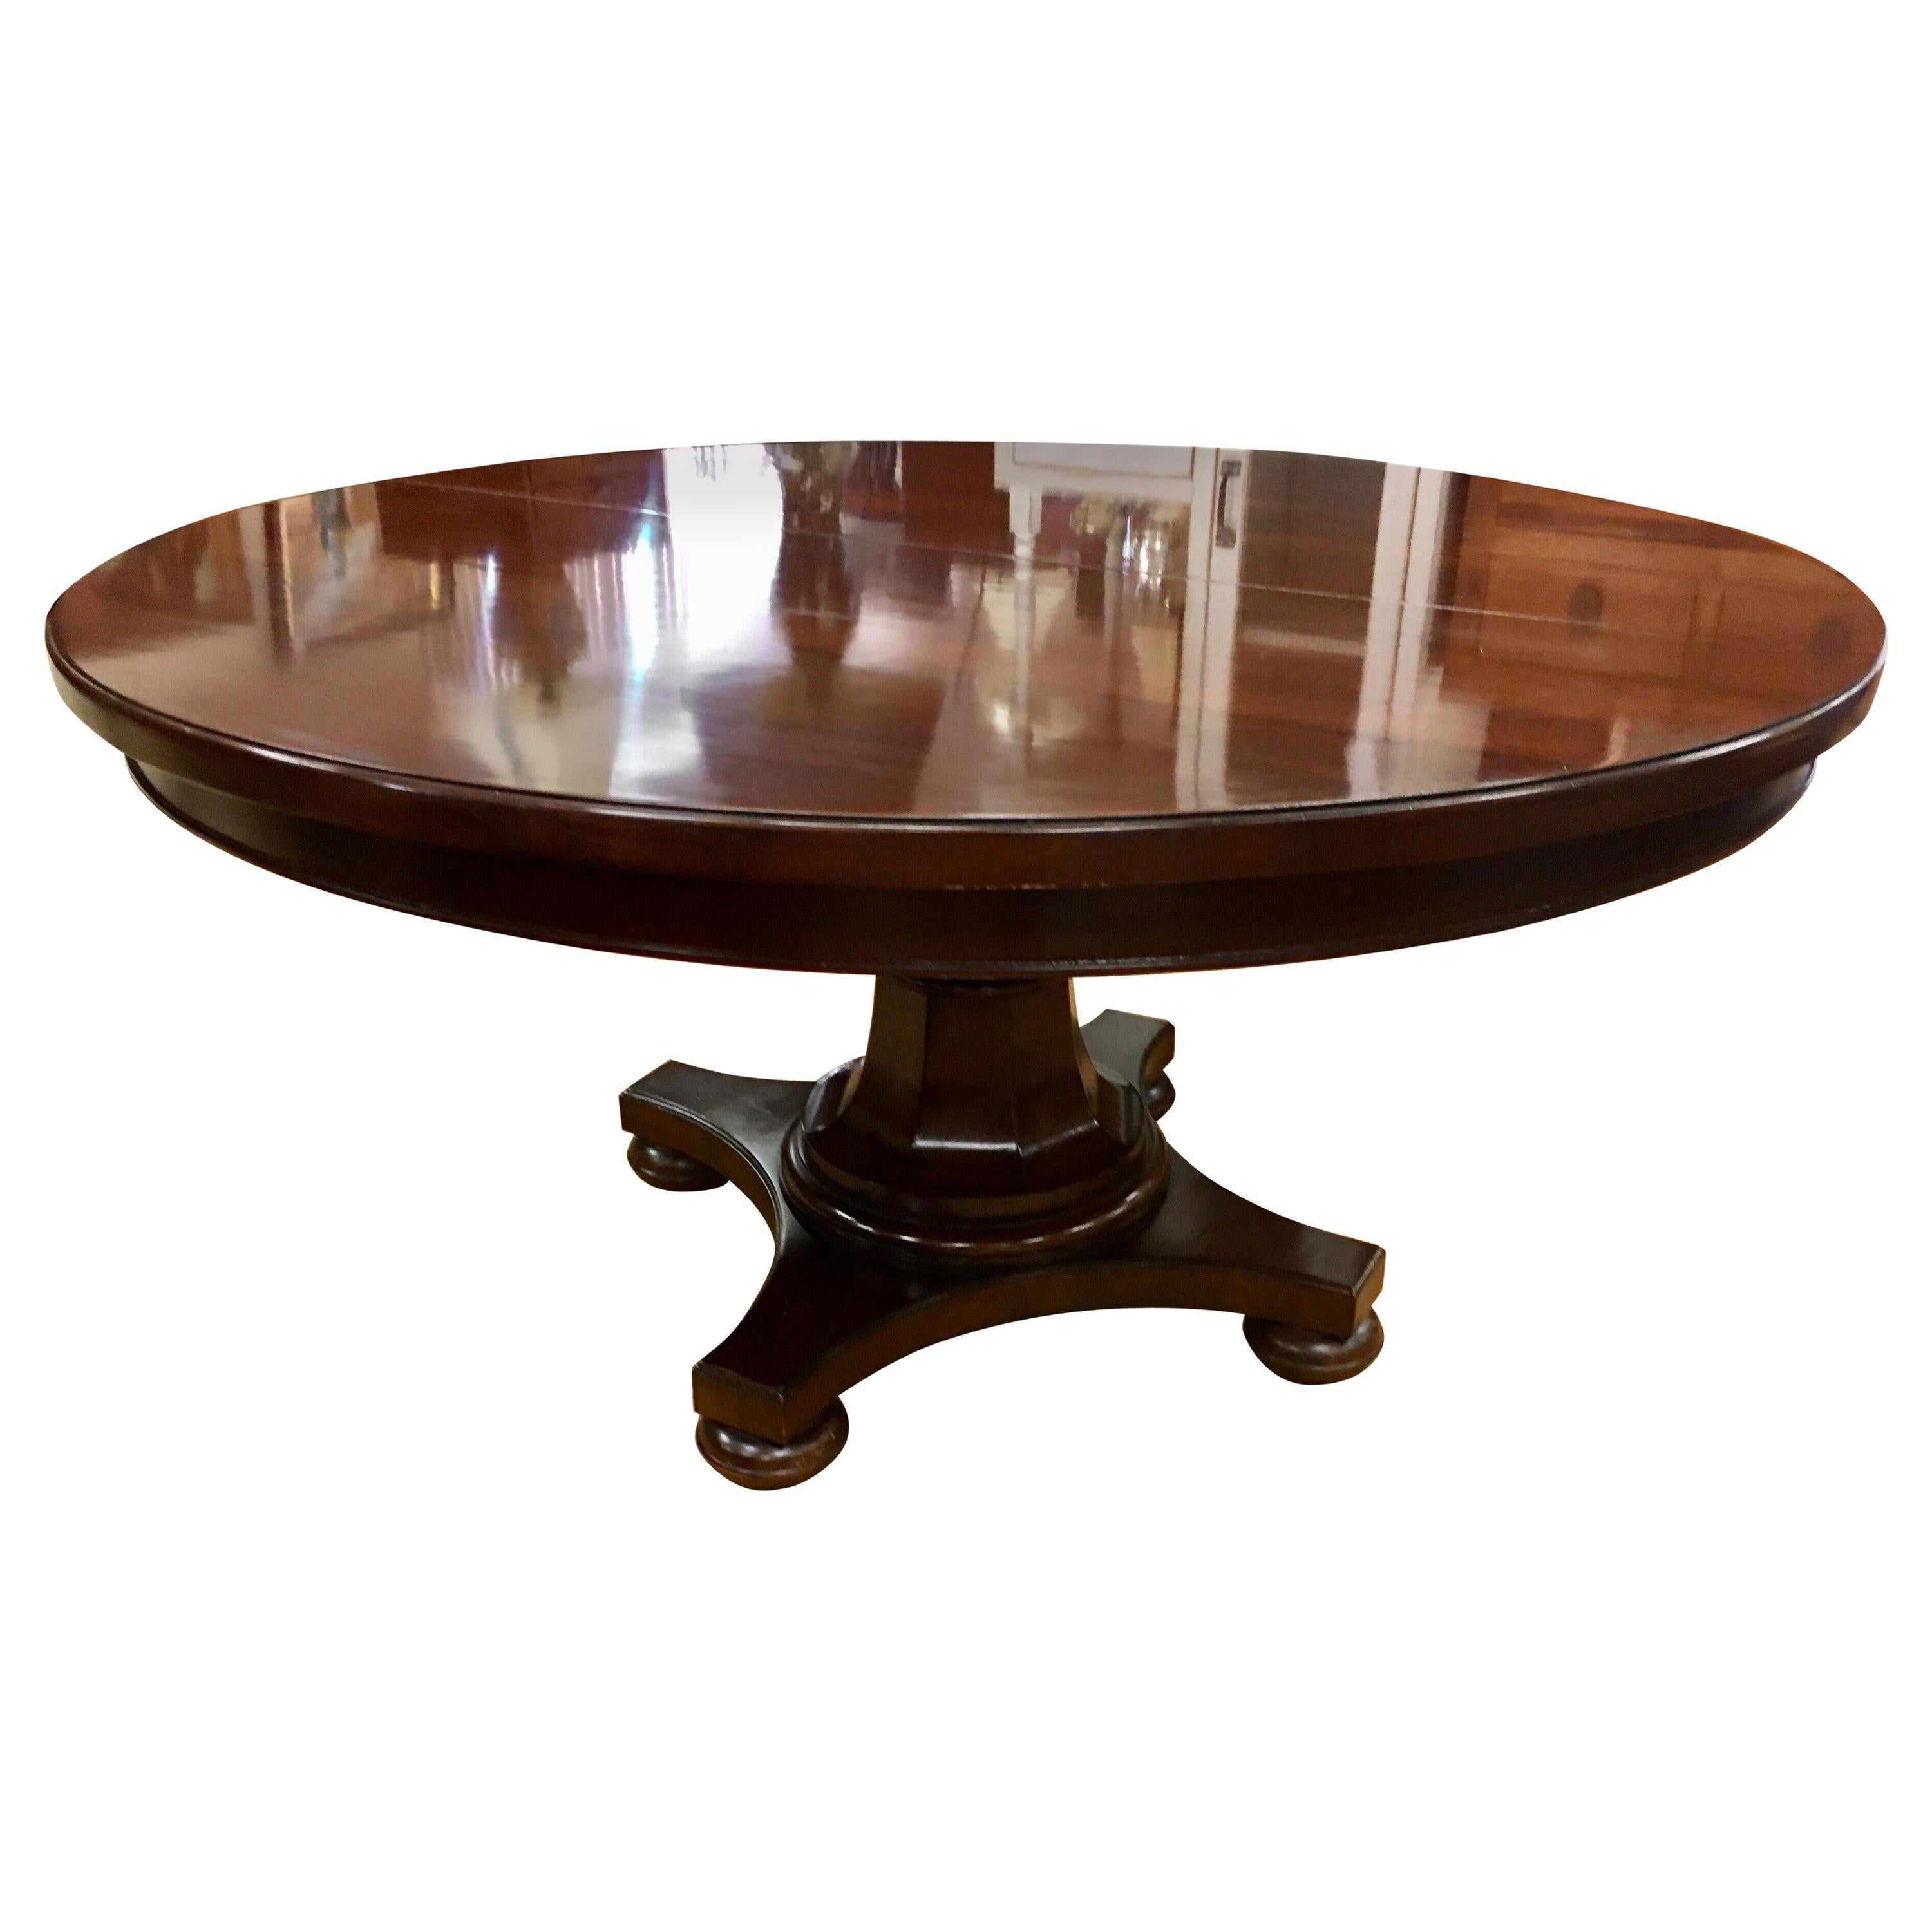 Round Mahogany Dining Room Table with Expandable Leaf